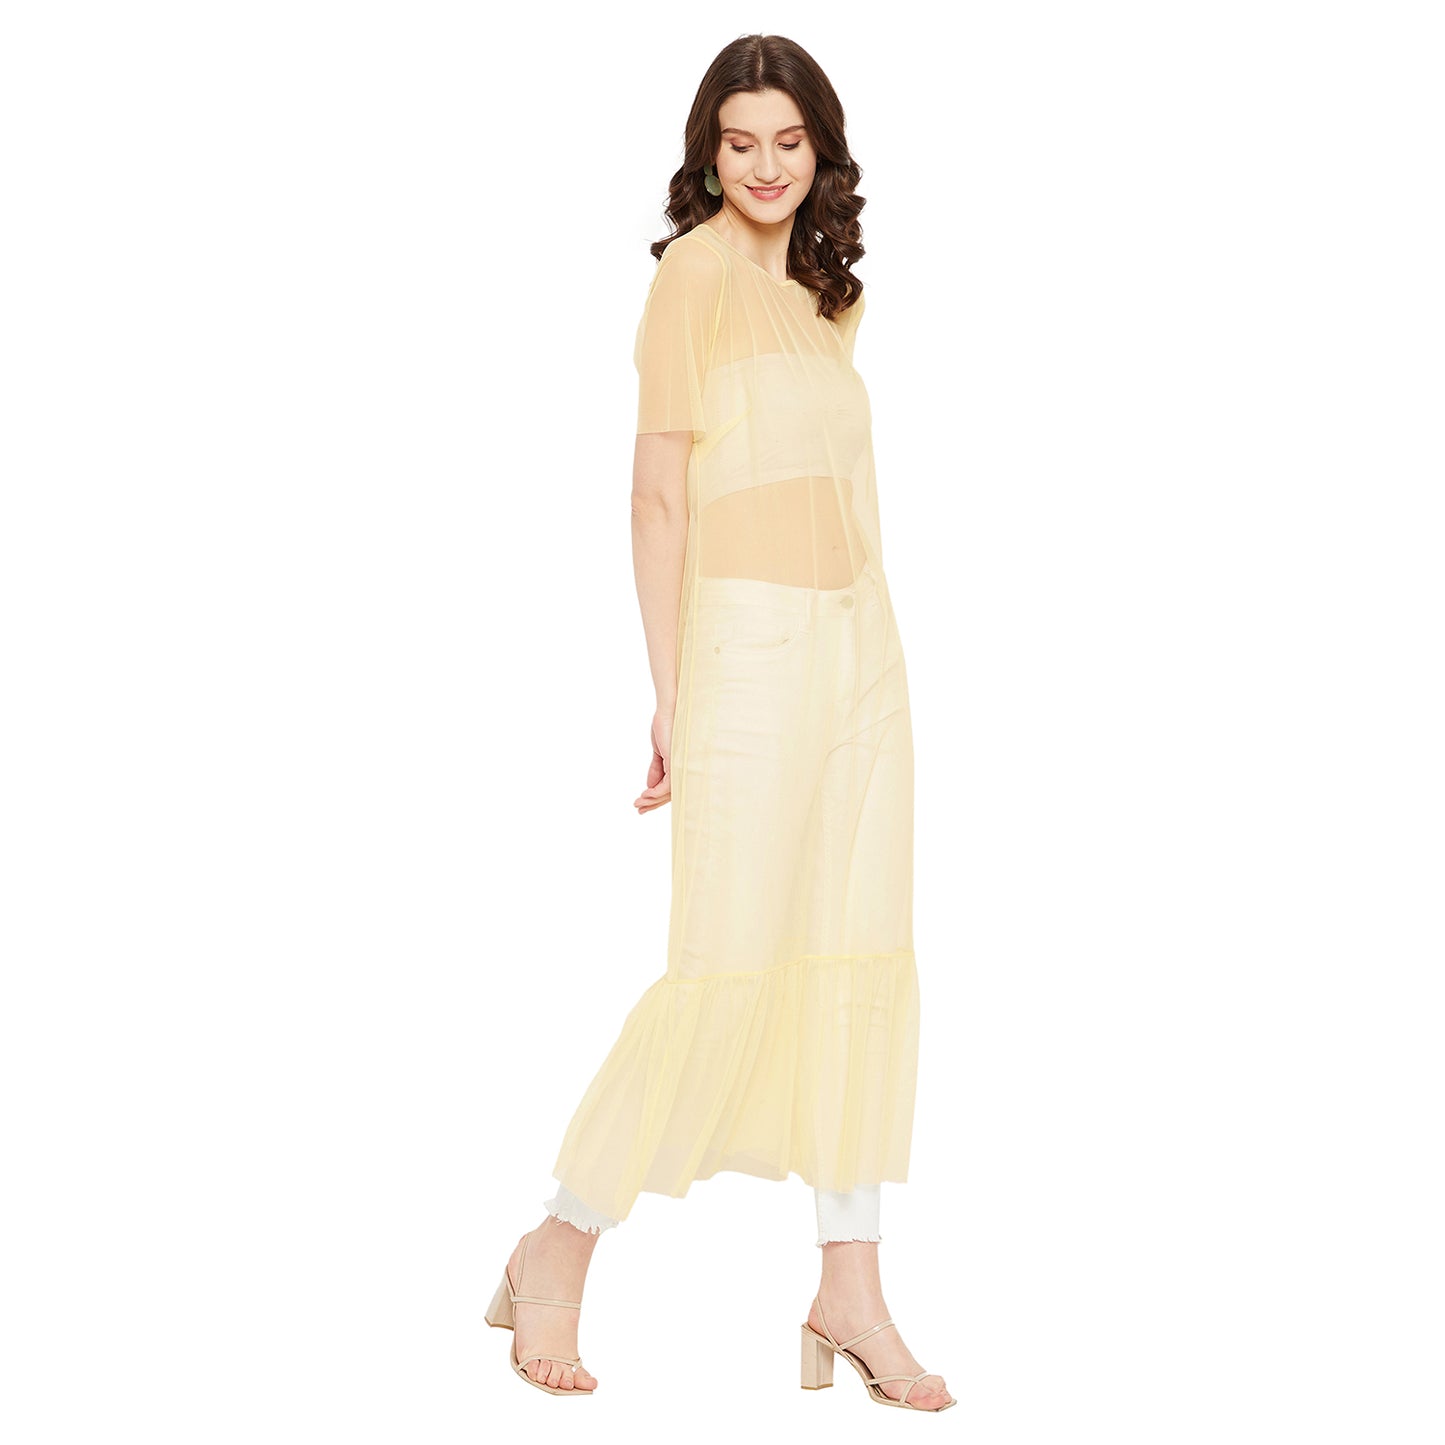 LY2 Sheer yellow Tulle Dress